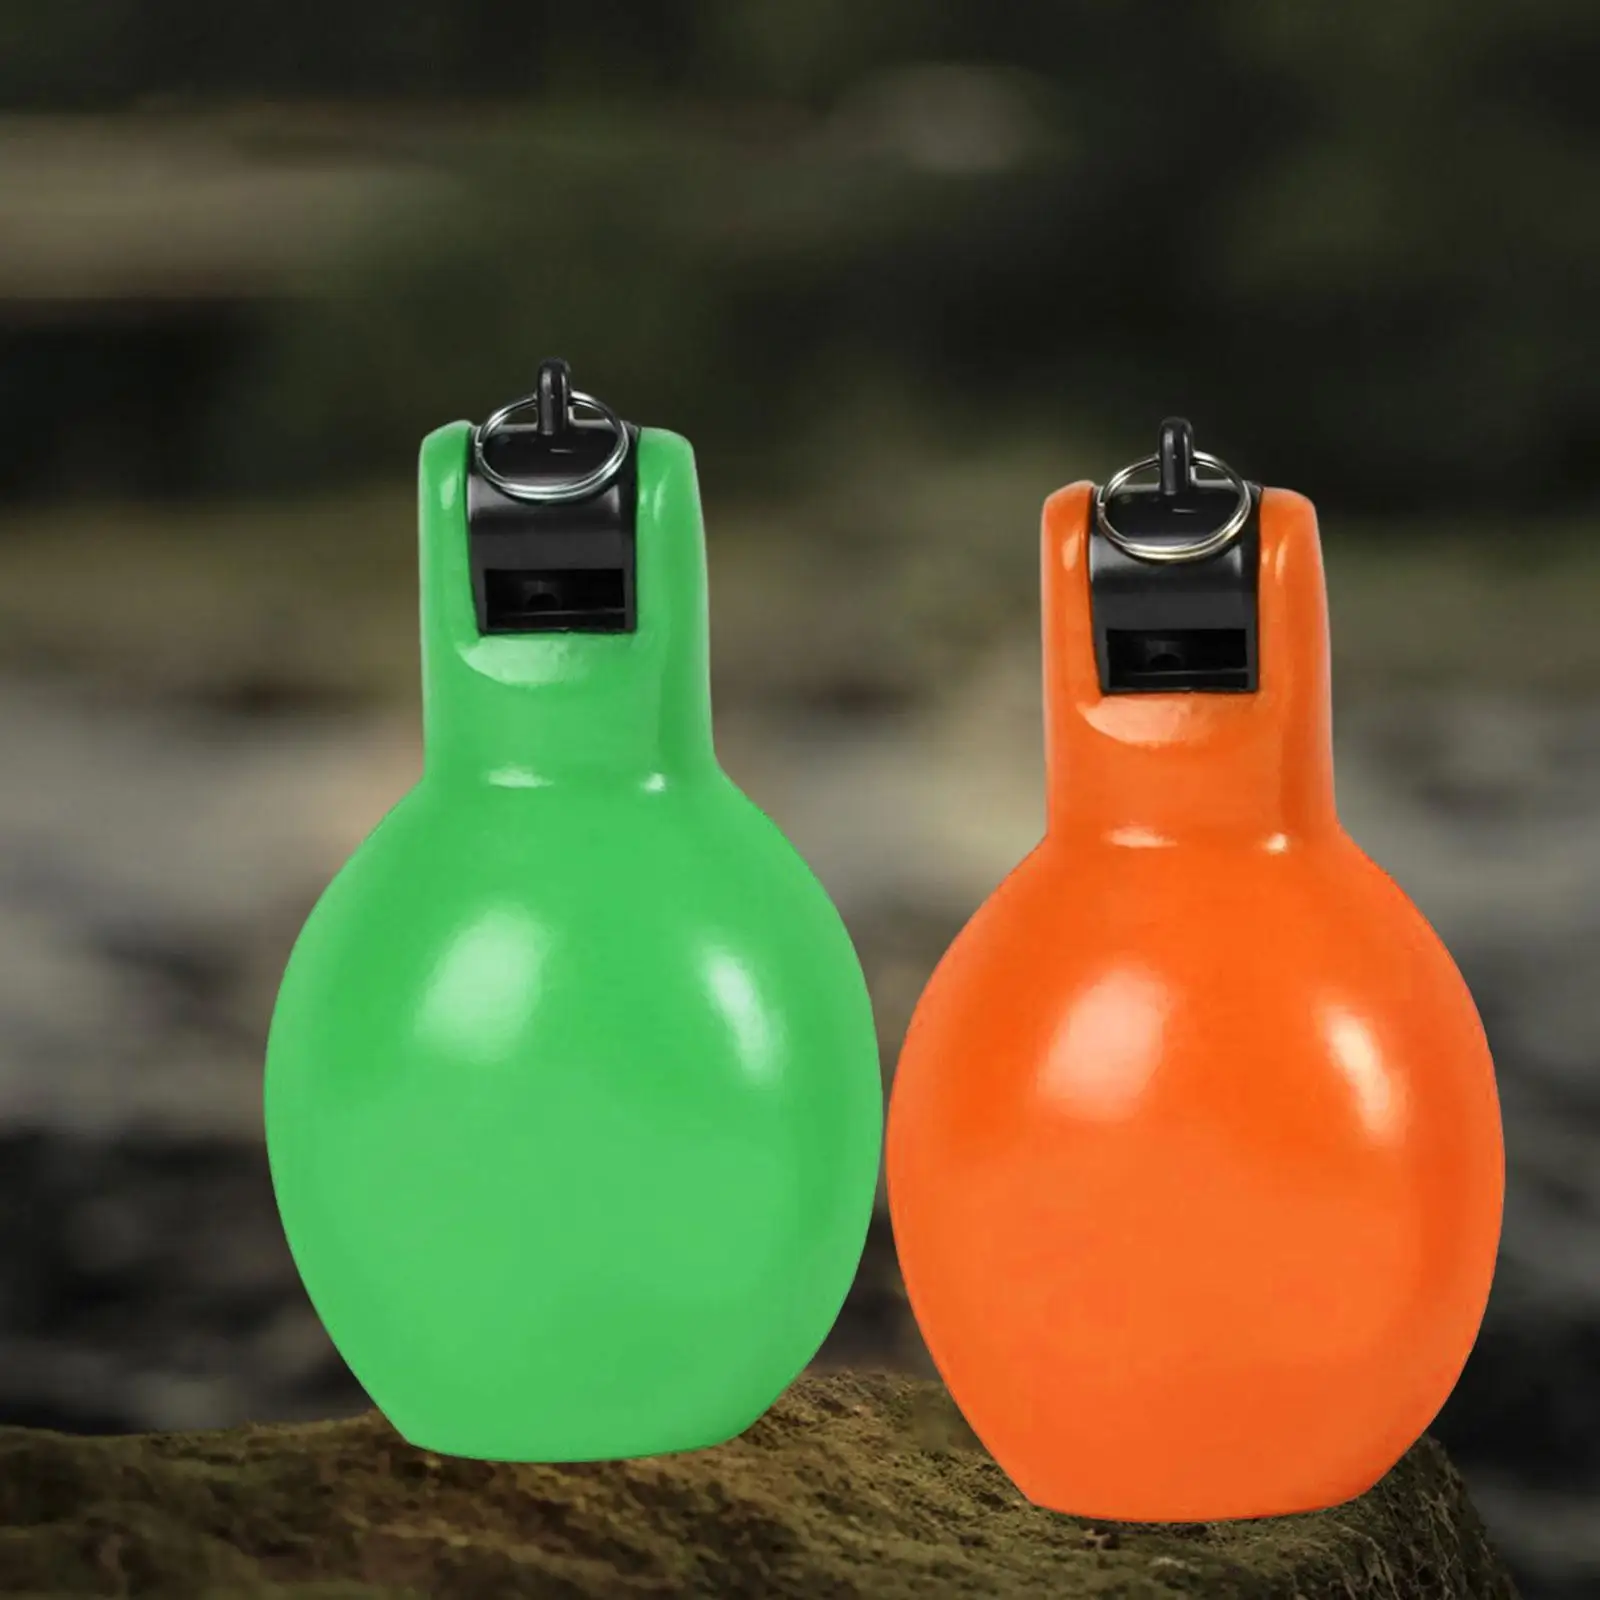 2x Hand Squeeze Whistles Loud Trainer Whistle for Basketball Hiking Training